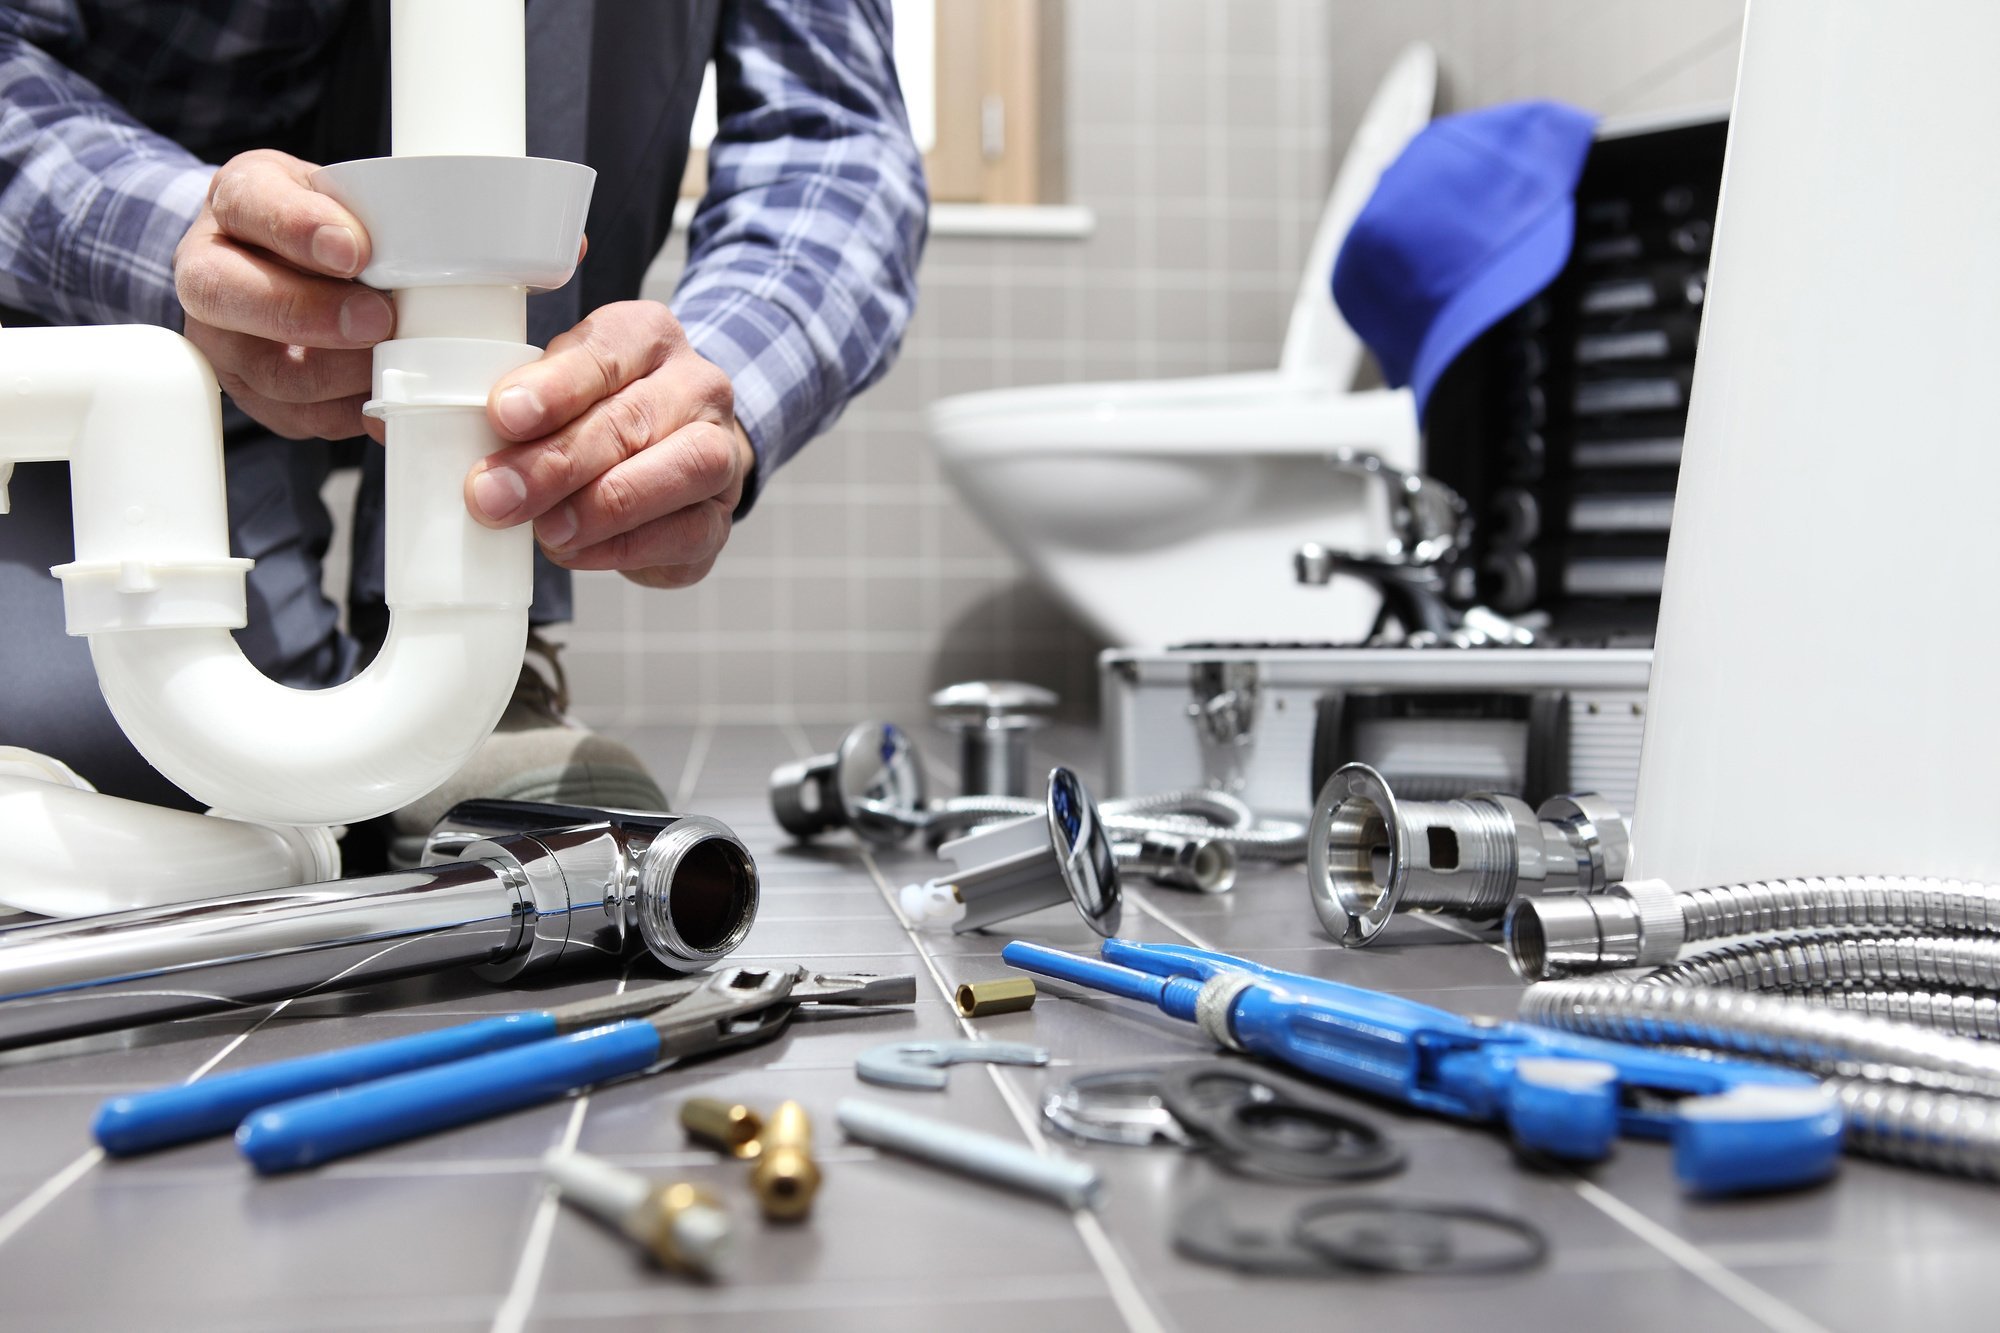 How to Find the Right & Professional Plumbing Company